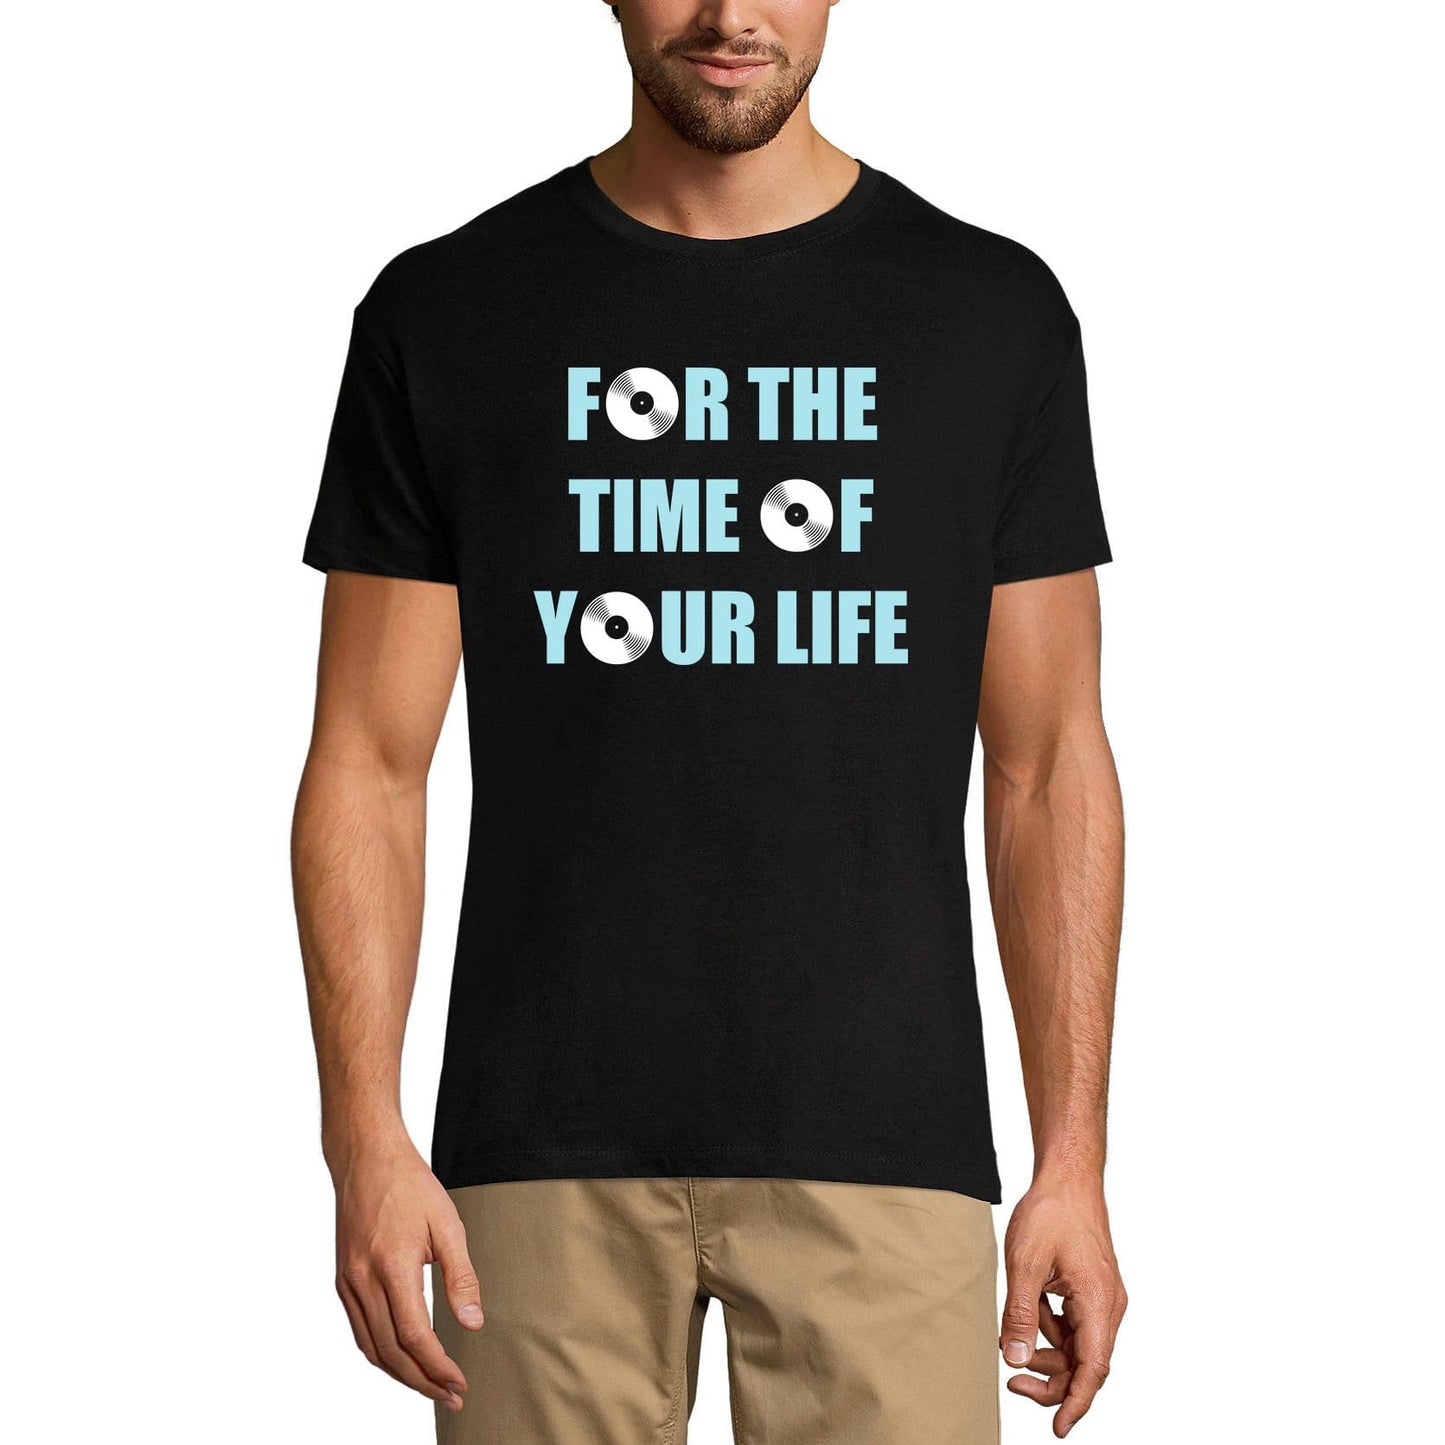 ULTRABASIC Men's Music T-Shirt For the Time of Your Life - Shirt for Musician